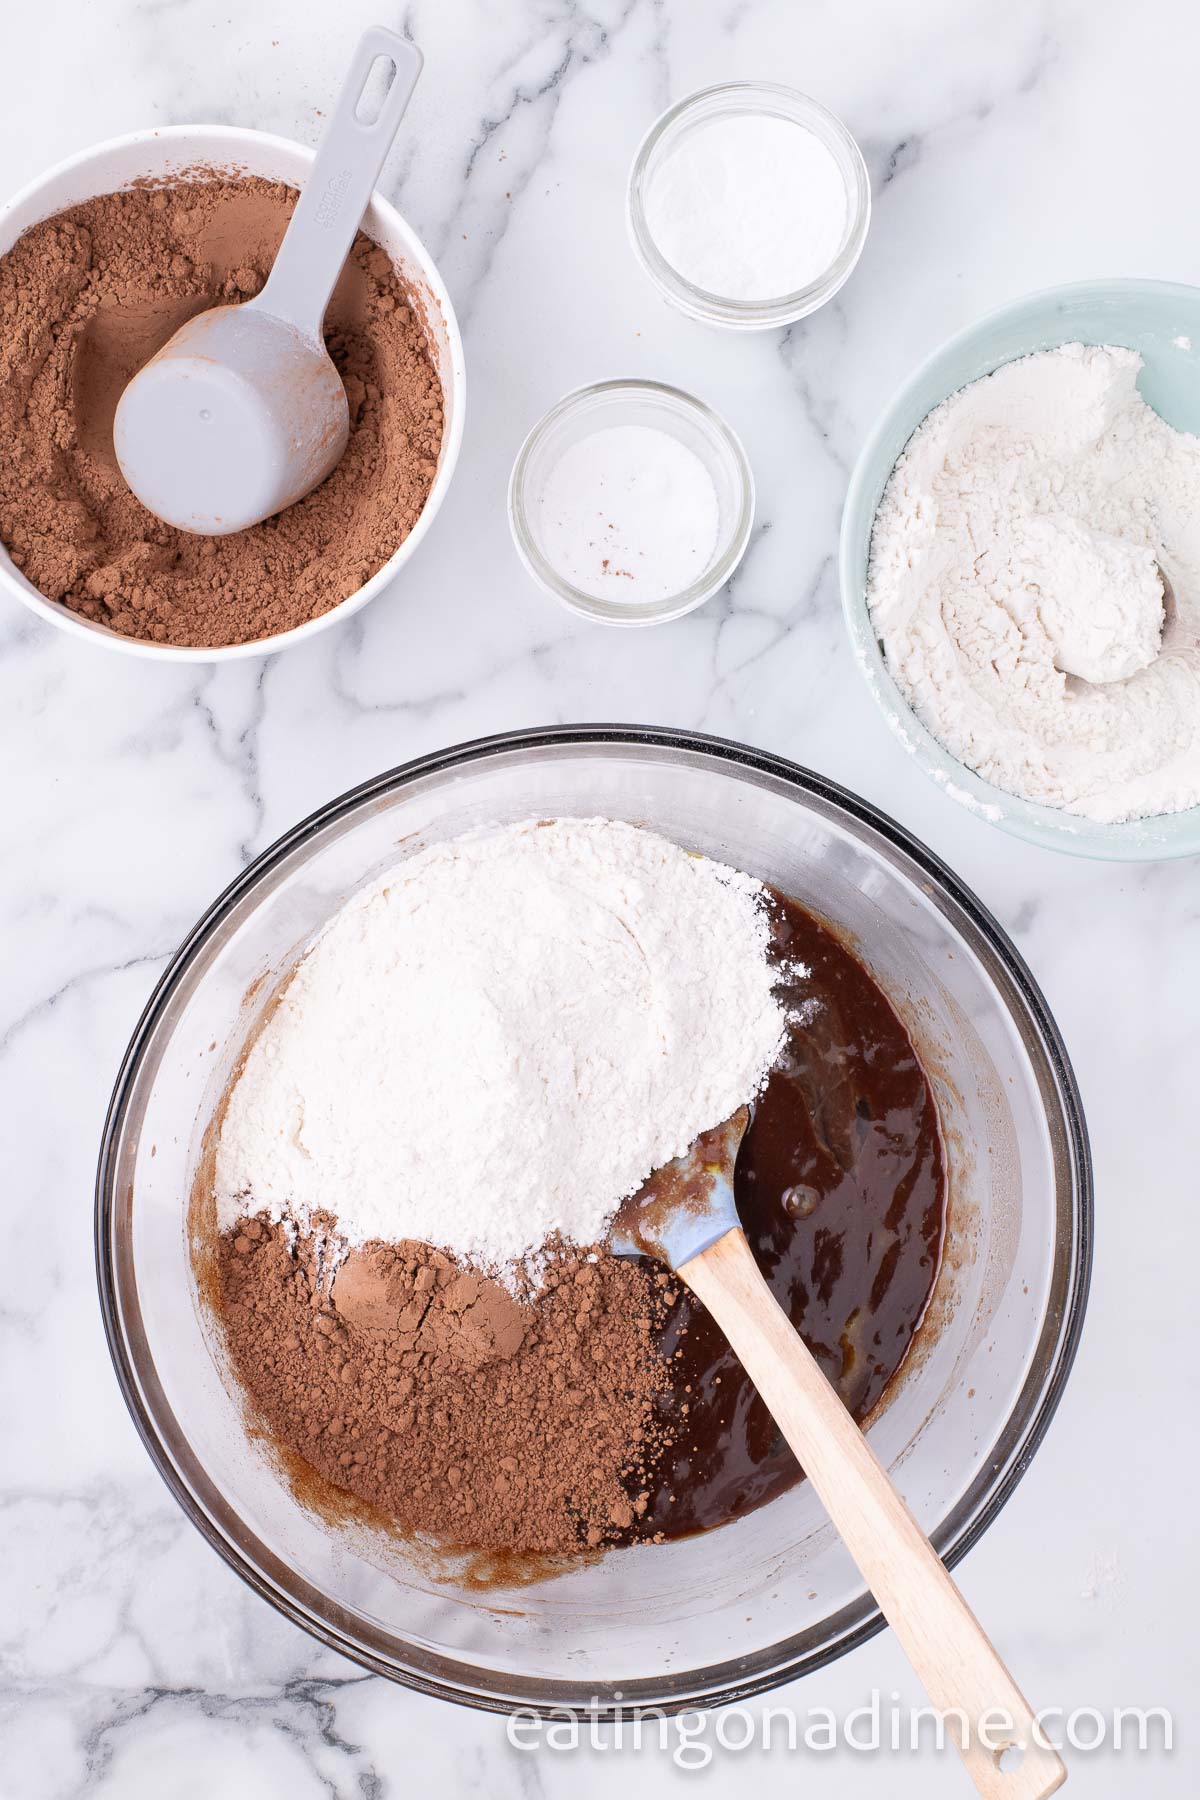 Cocoa powder, flour, salt, and baking powder mixed in with sugar mixture